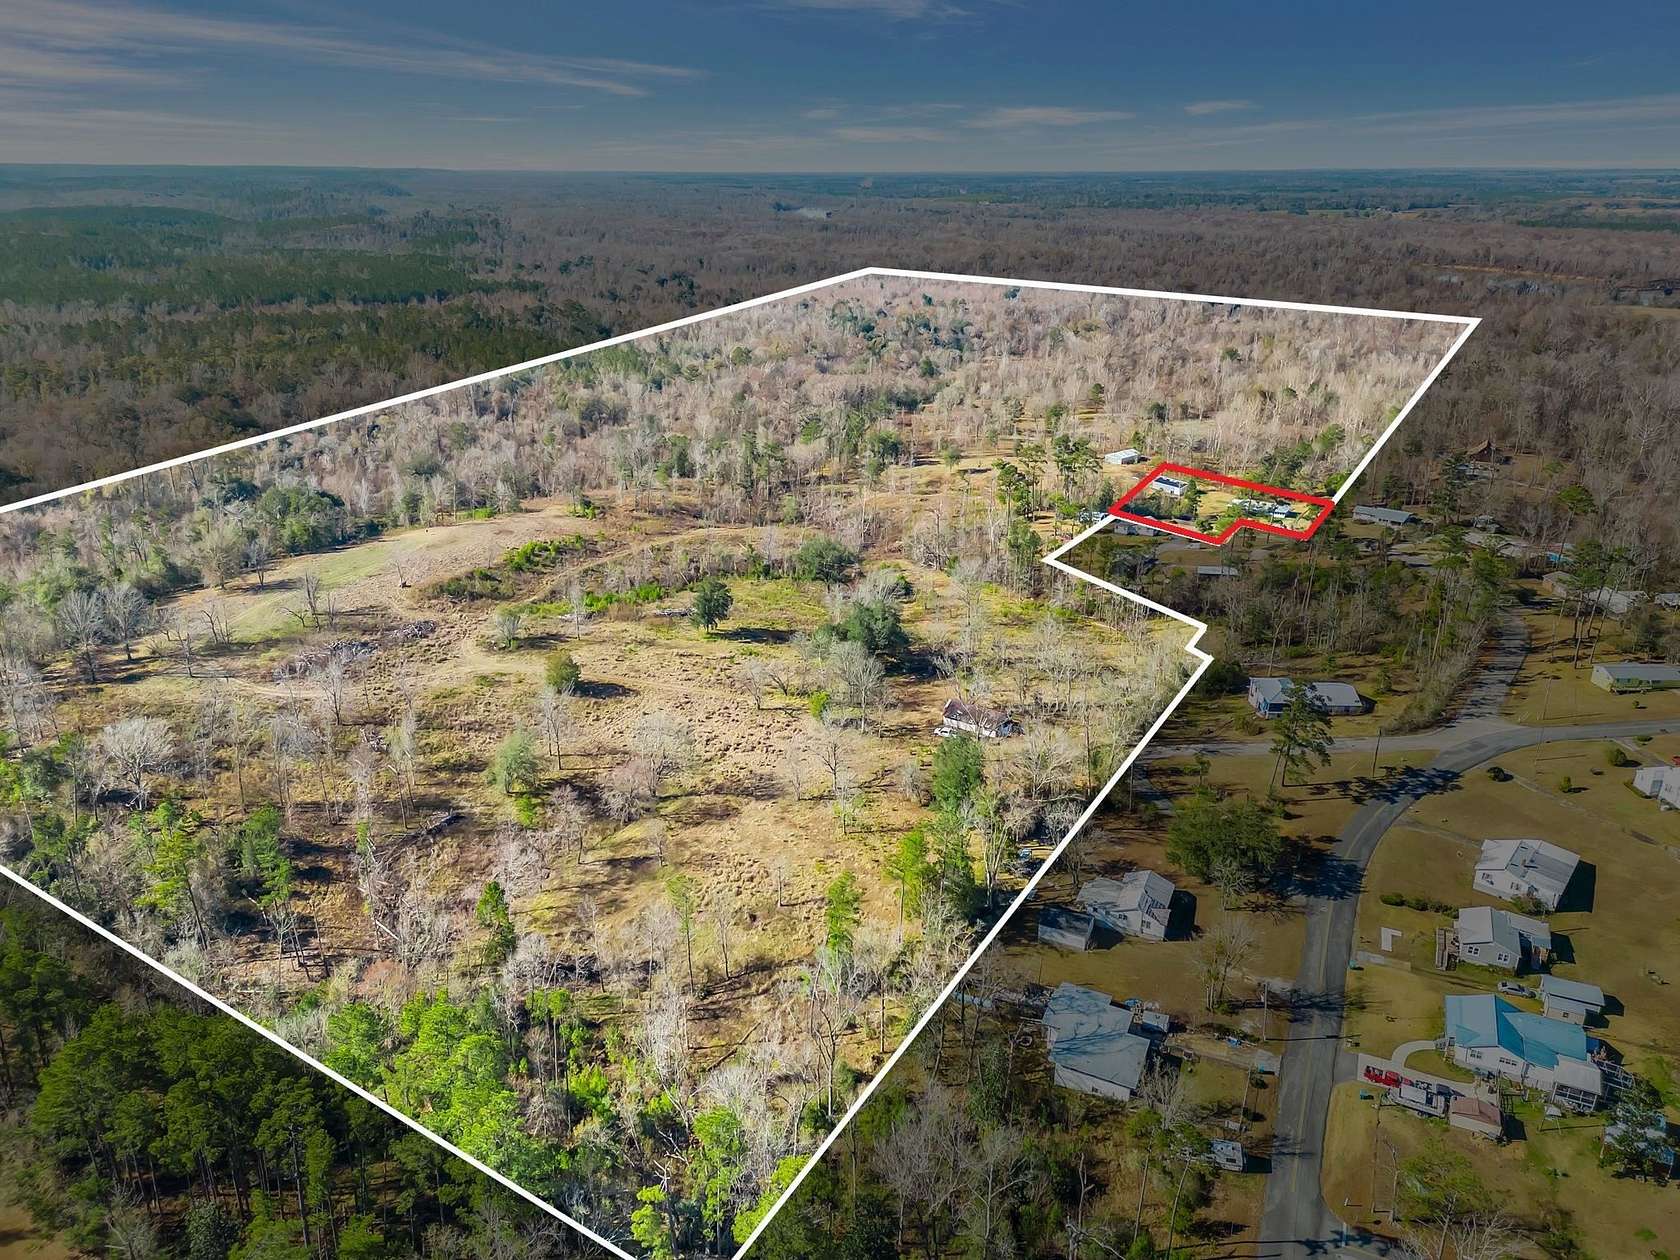 76.5 Acres of Land for Sale in Chattahoochee, Florida